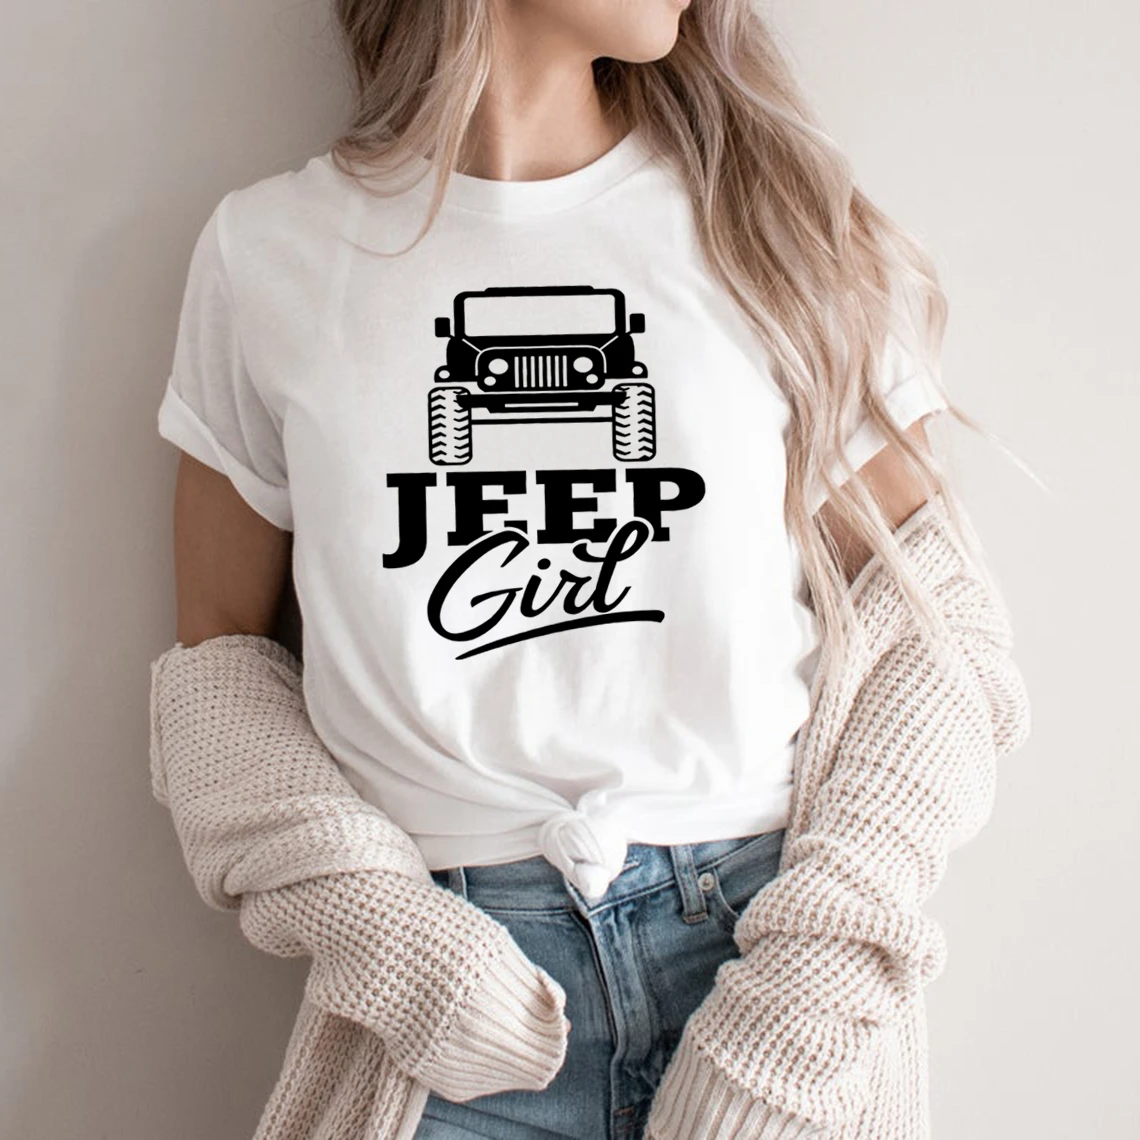 Jeep Girl T Shirt GraphicJeep Lover Tees Summer Casual Short Sleeve Round Neck Shirts for Girls graphic tees women